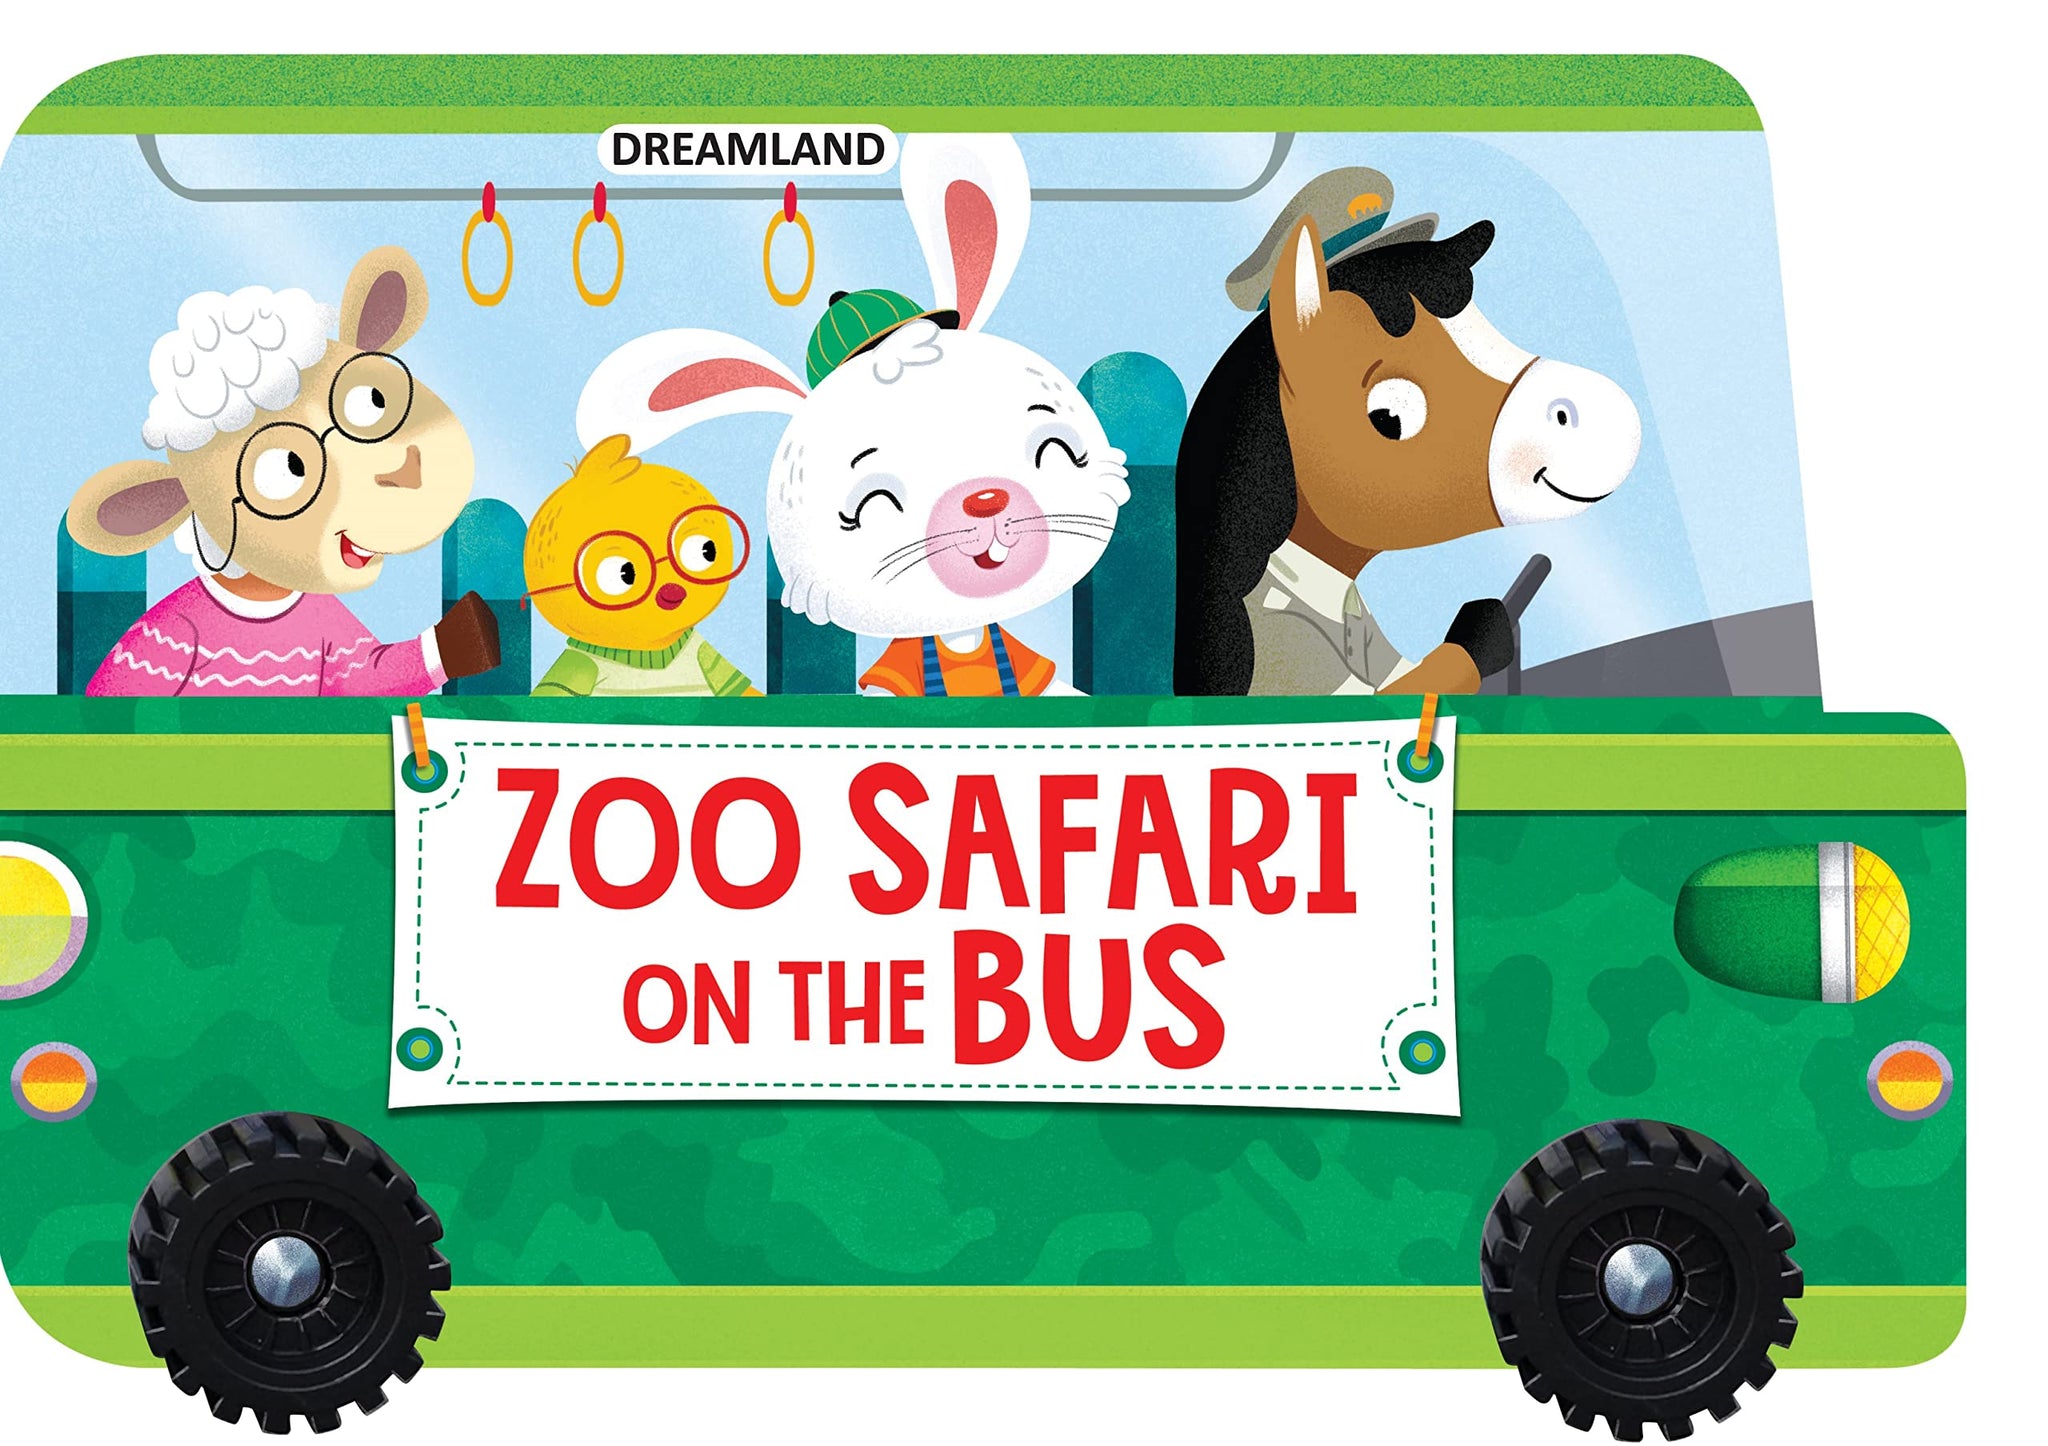 Zoo Safari on the Bus- A Shaped Picture Board book with Wheels